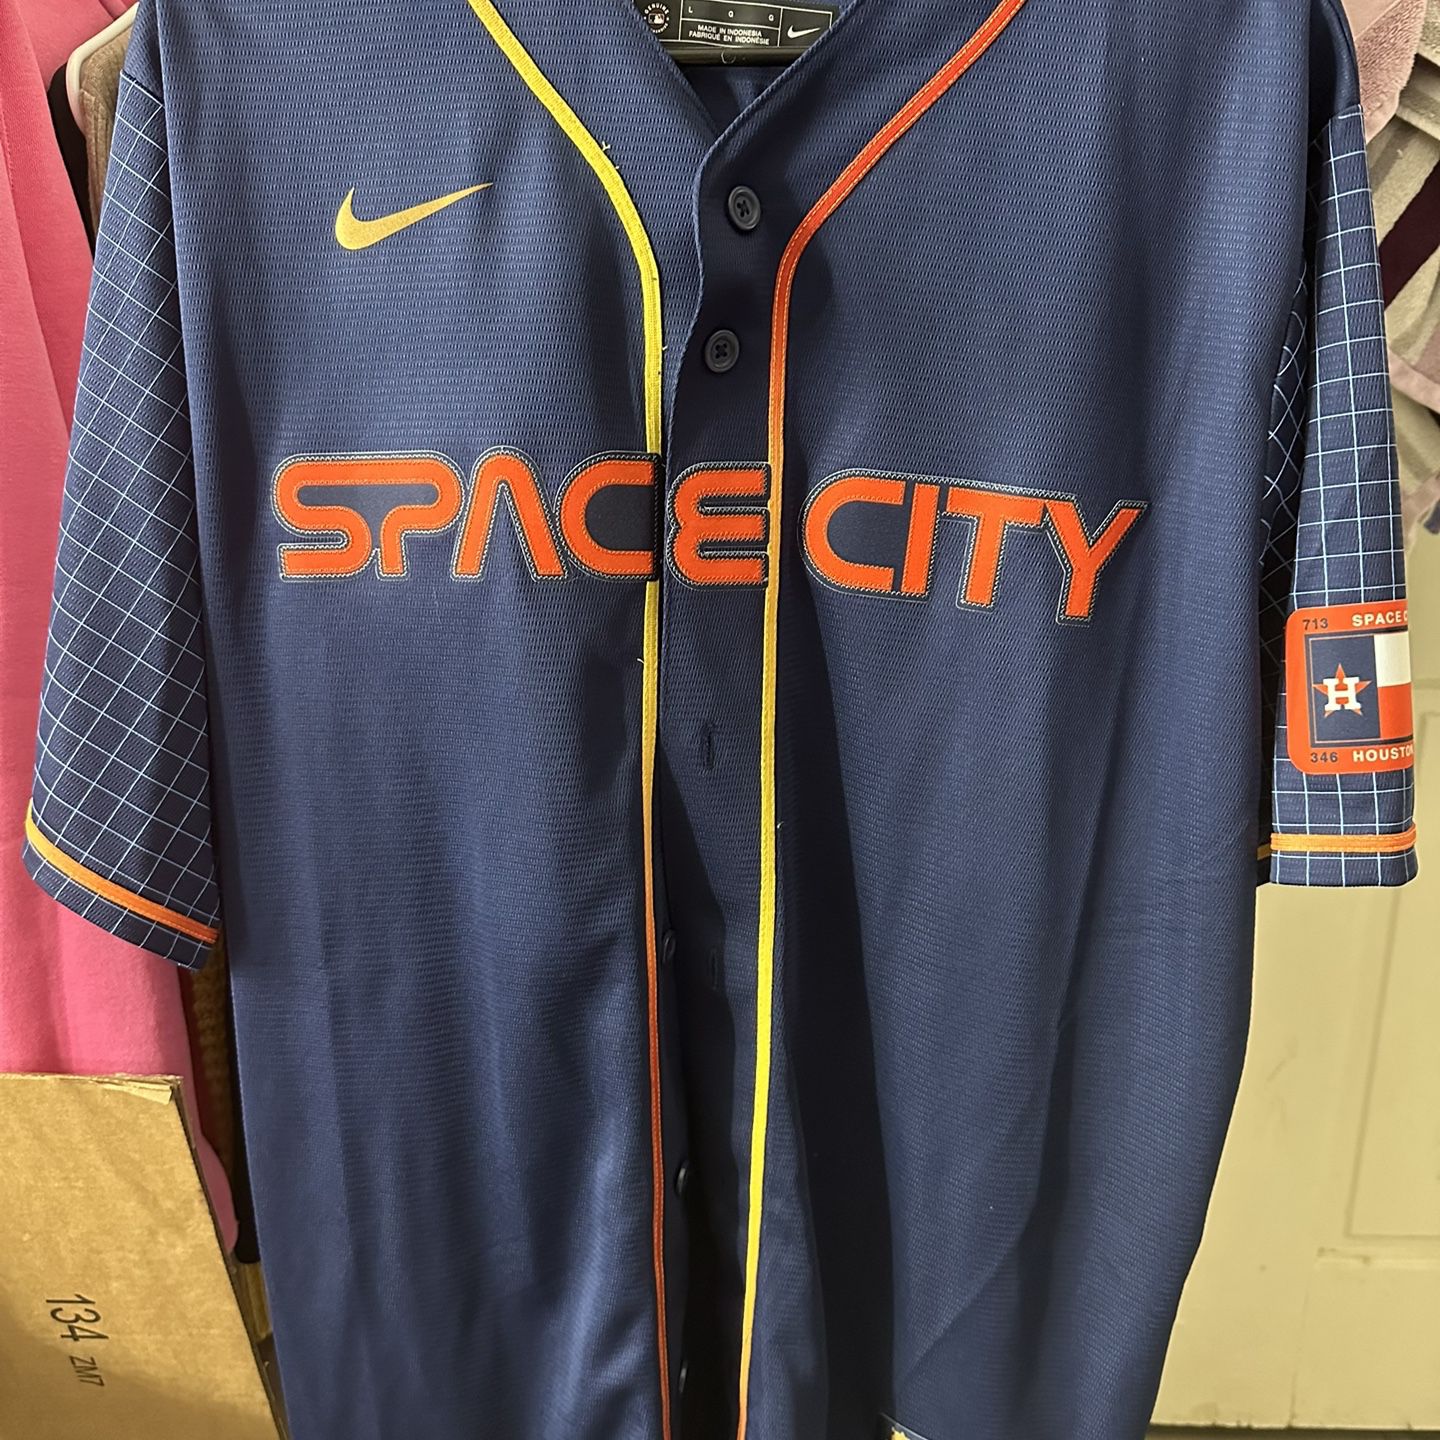 Houston Astros Jersey for Sale in Fort Lauderdale, FL - OfferUp